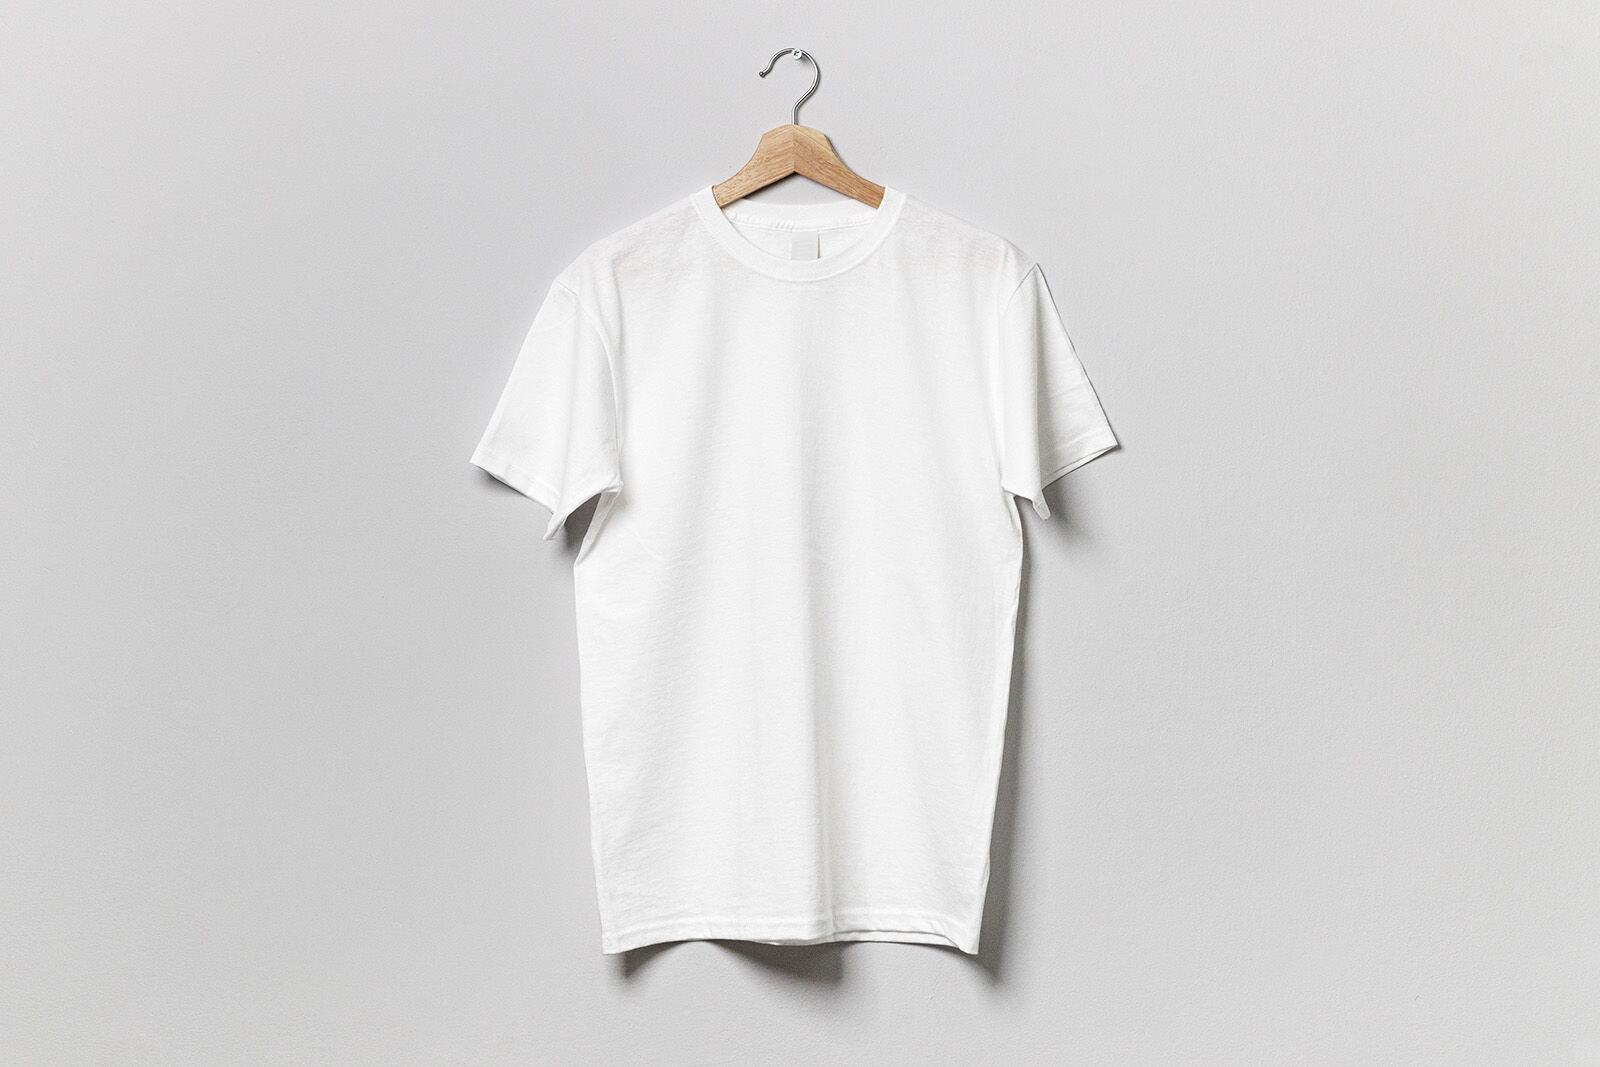 Simple T-Shirt on the Hanger Mockup FREE PSD